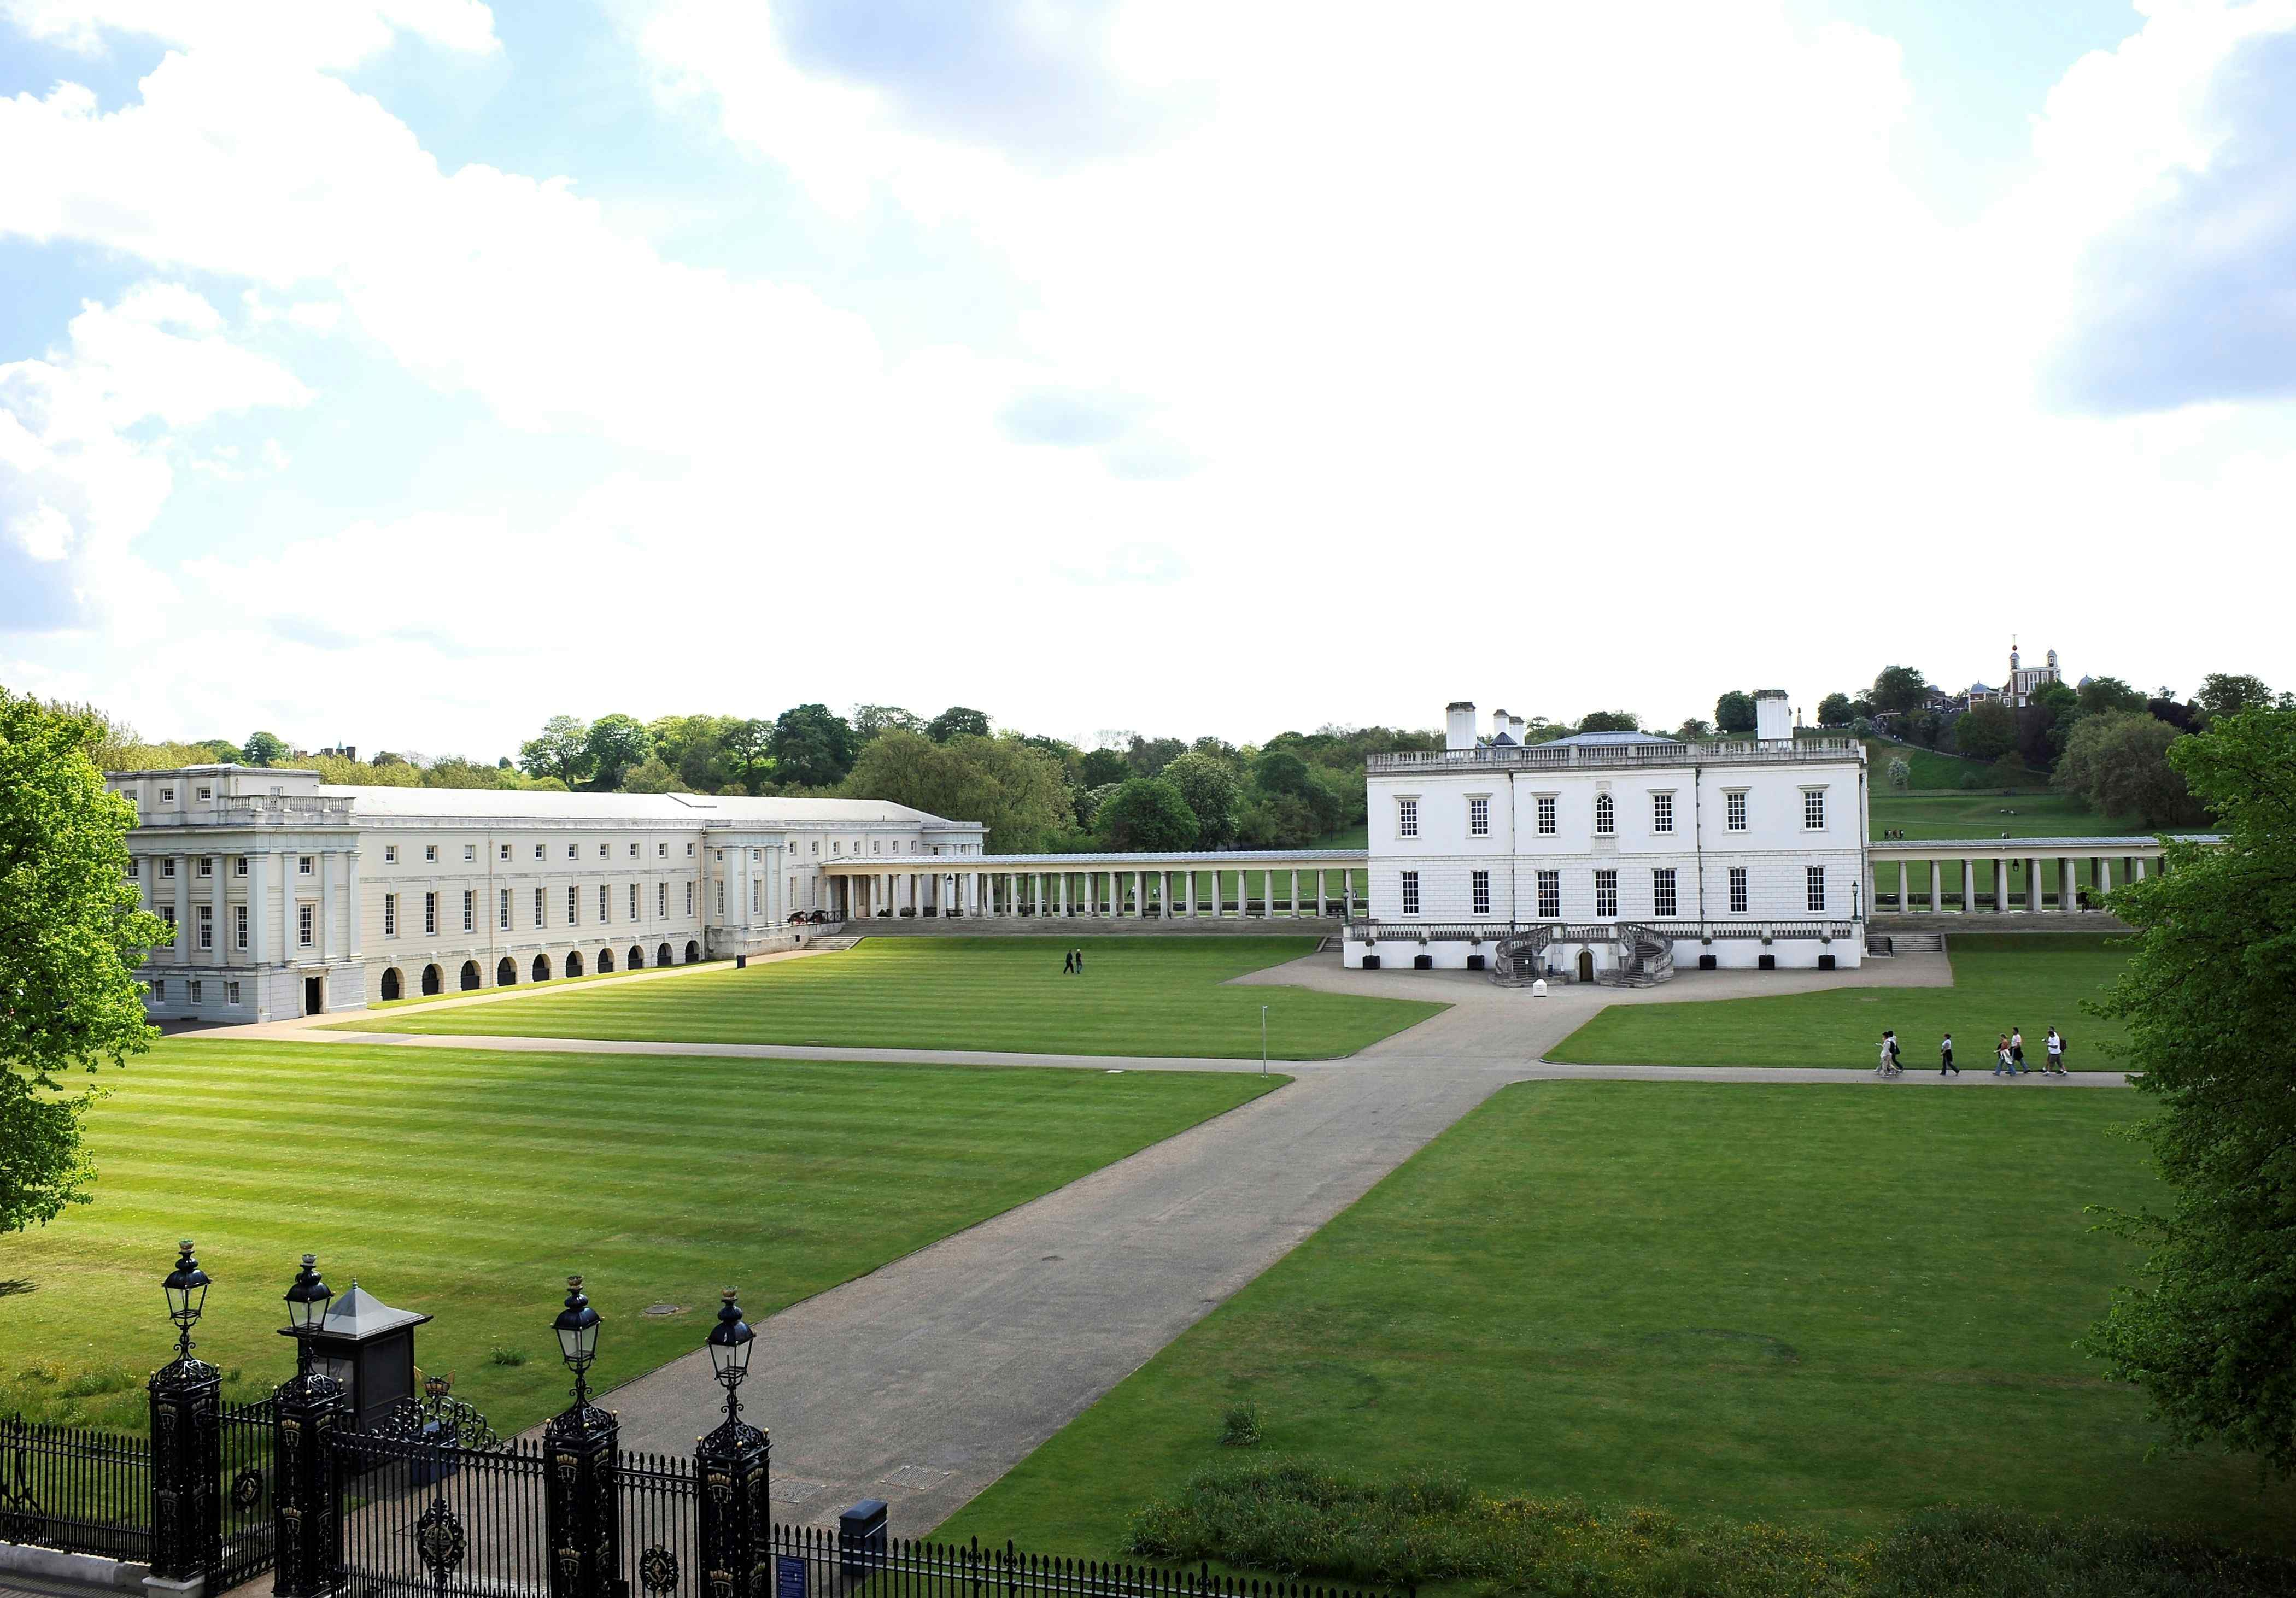 South East Lawn , The Grounds at the Royal Museums Greenwich